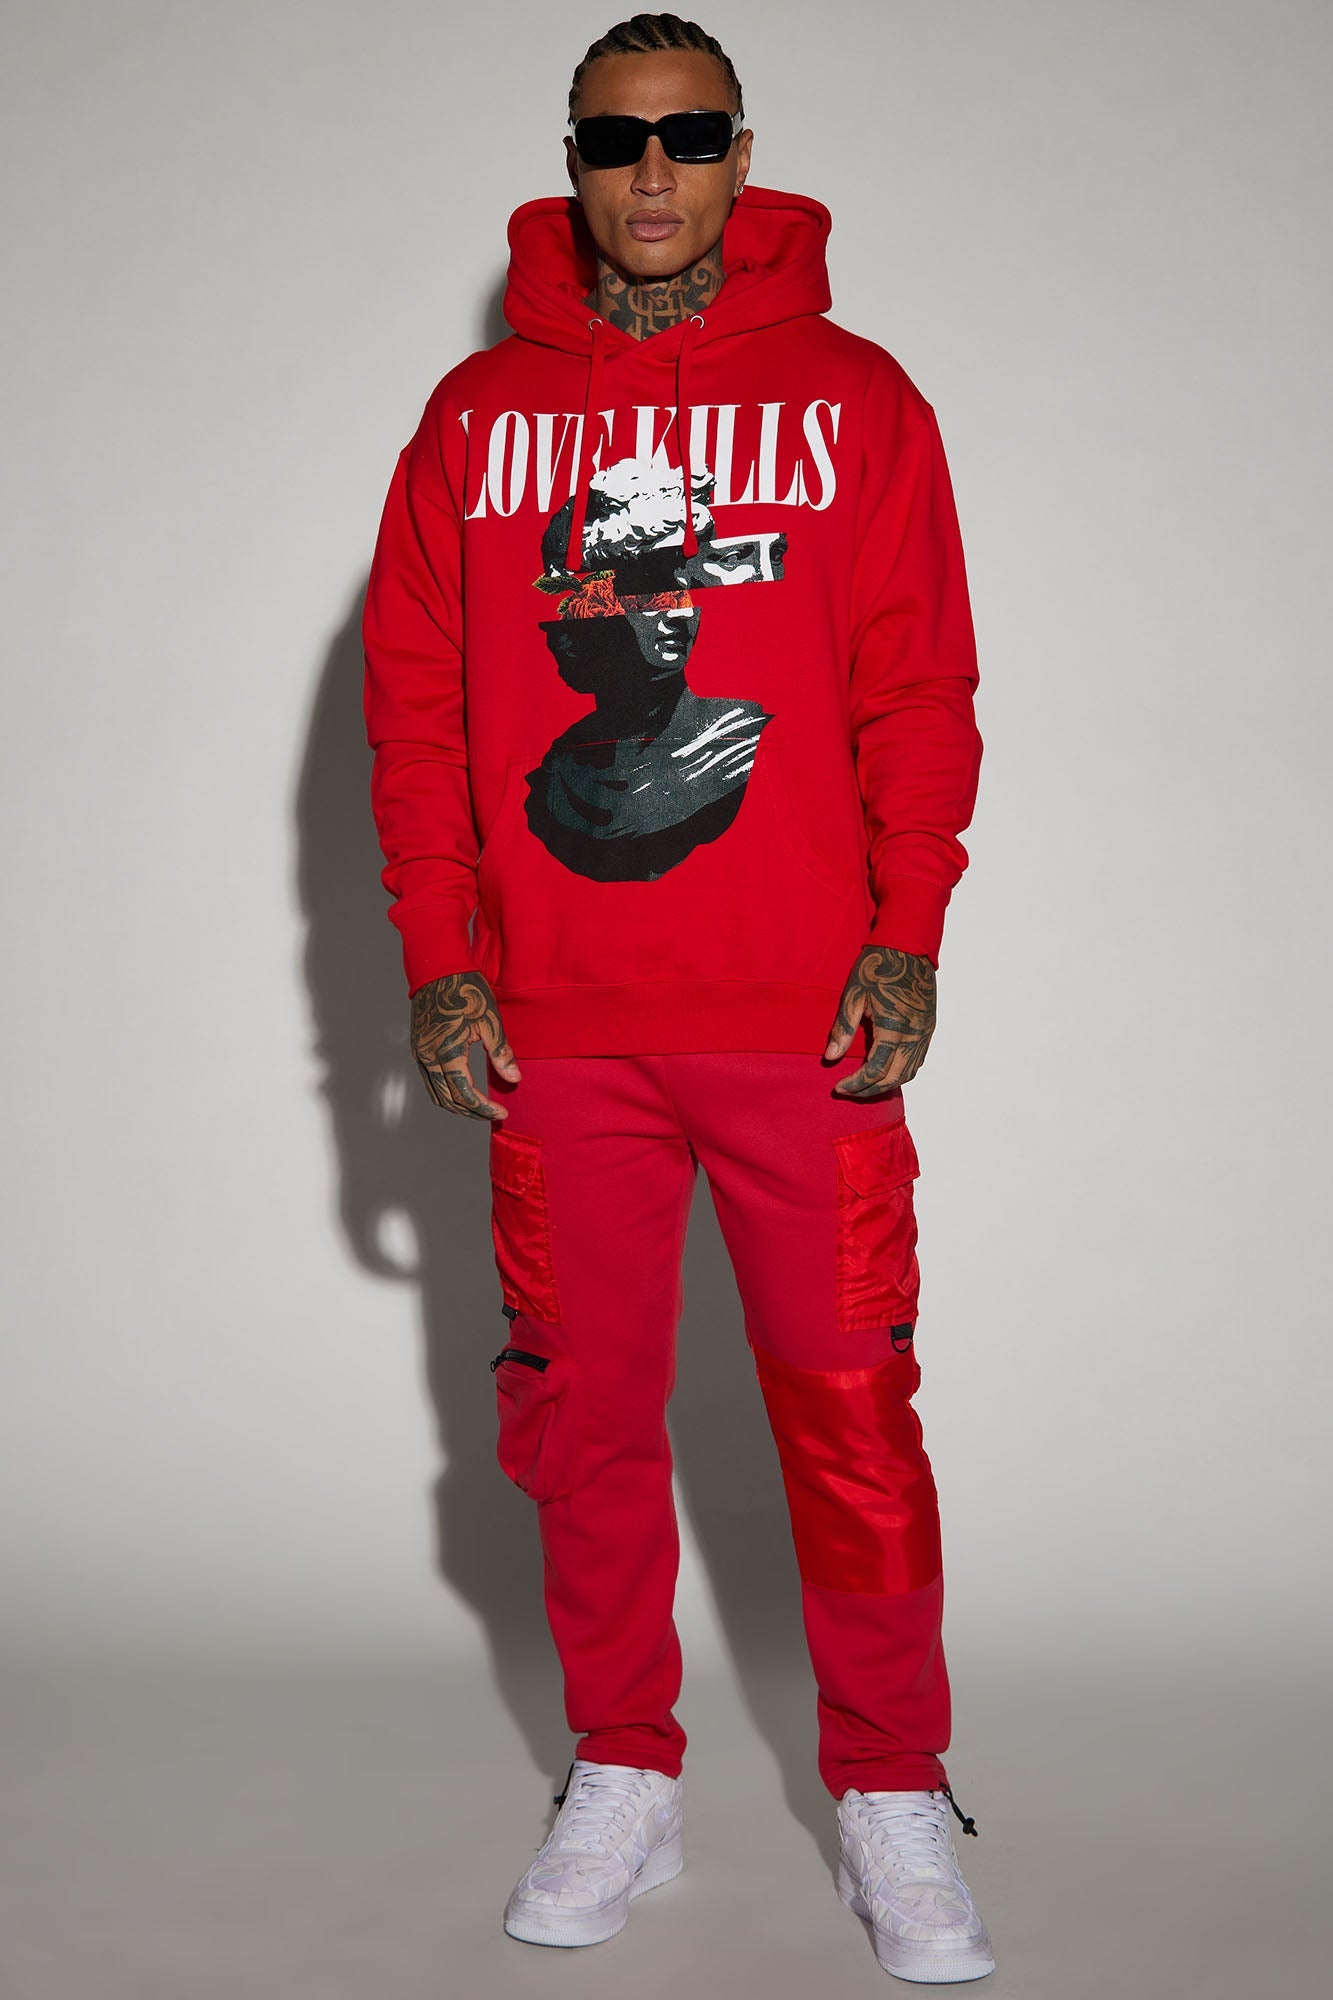 Cool and Cozy: If Love Kills Hoodie in Red